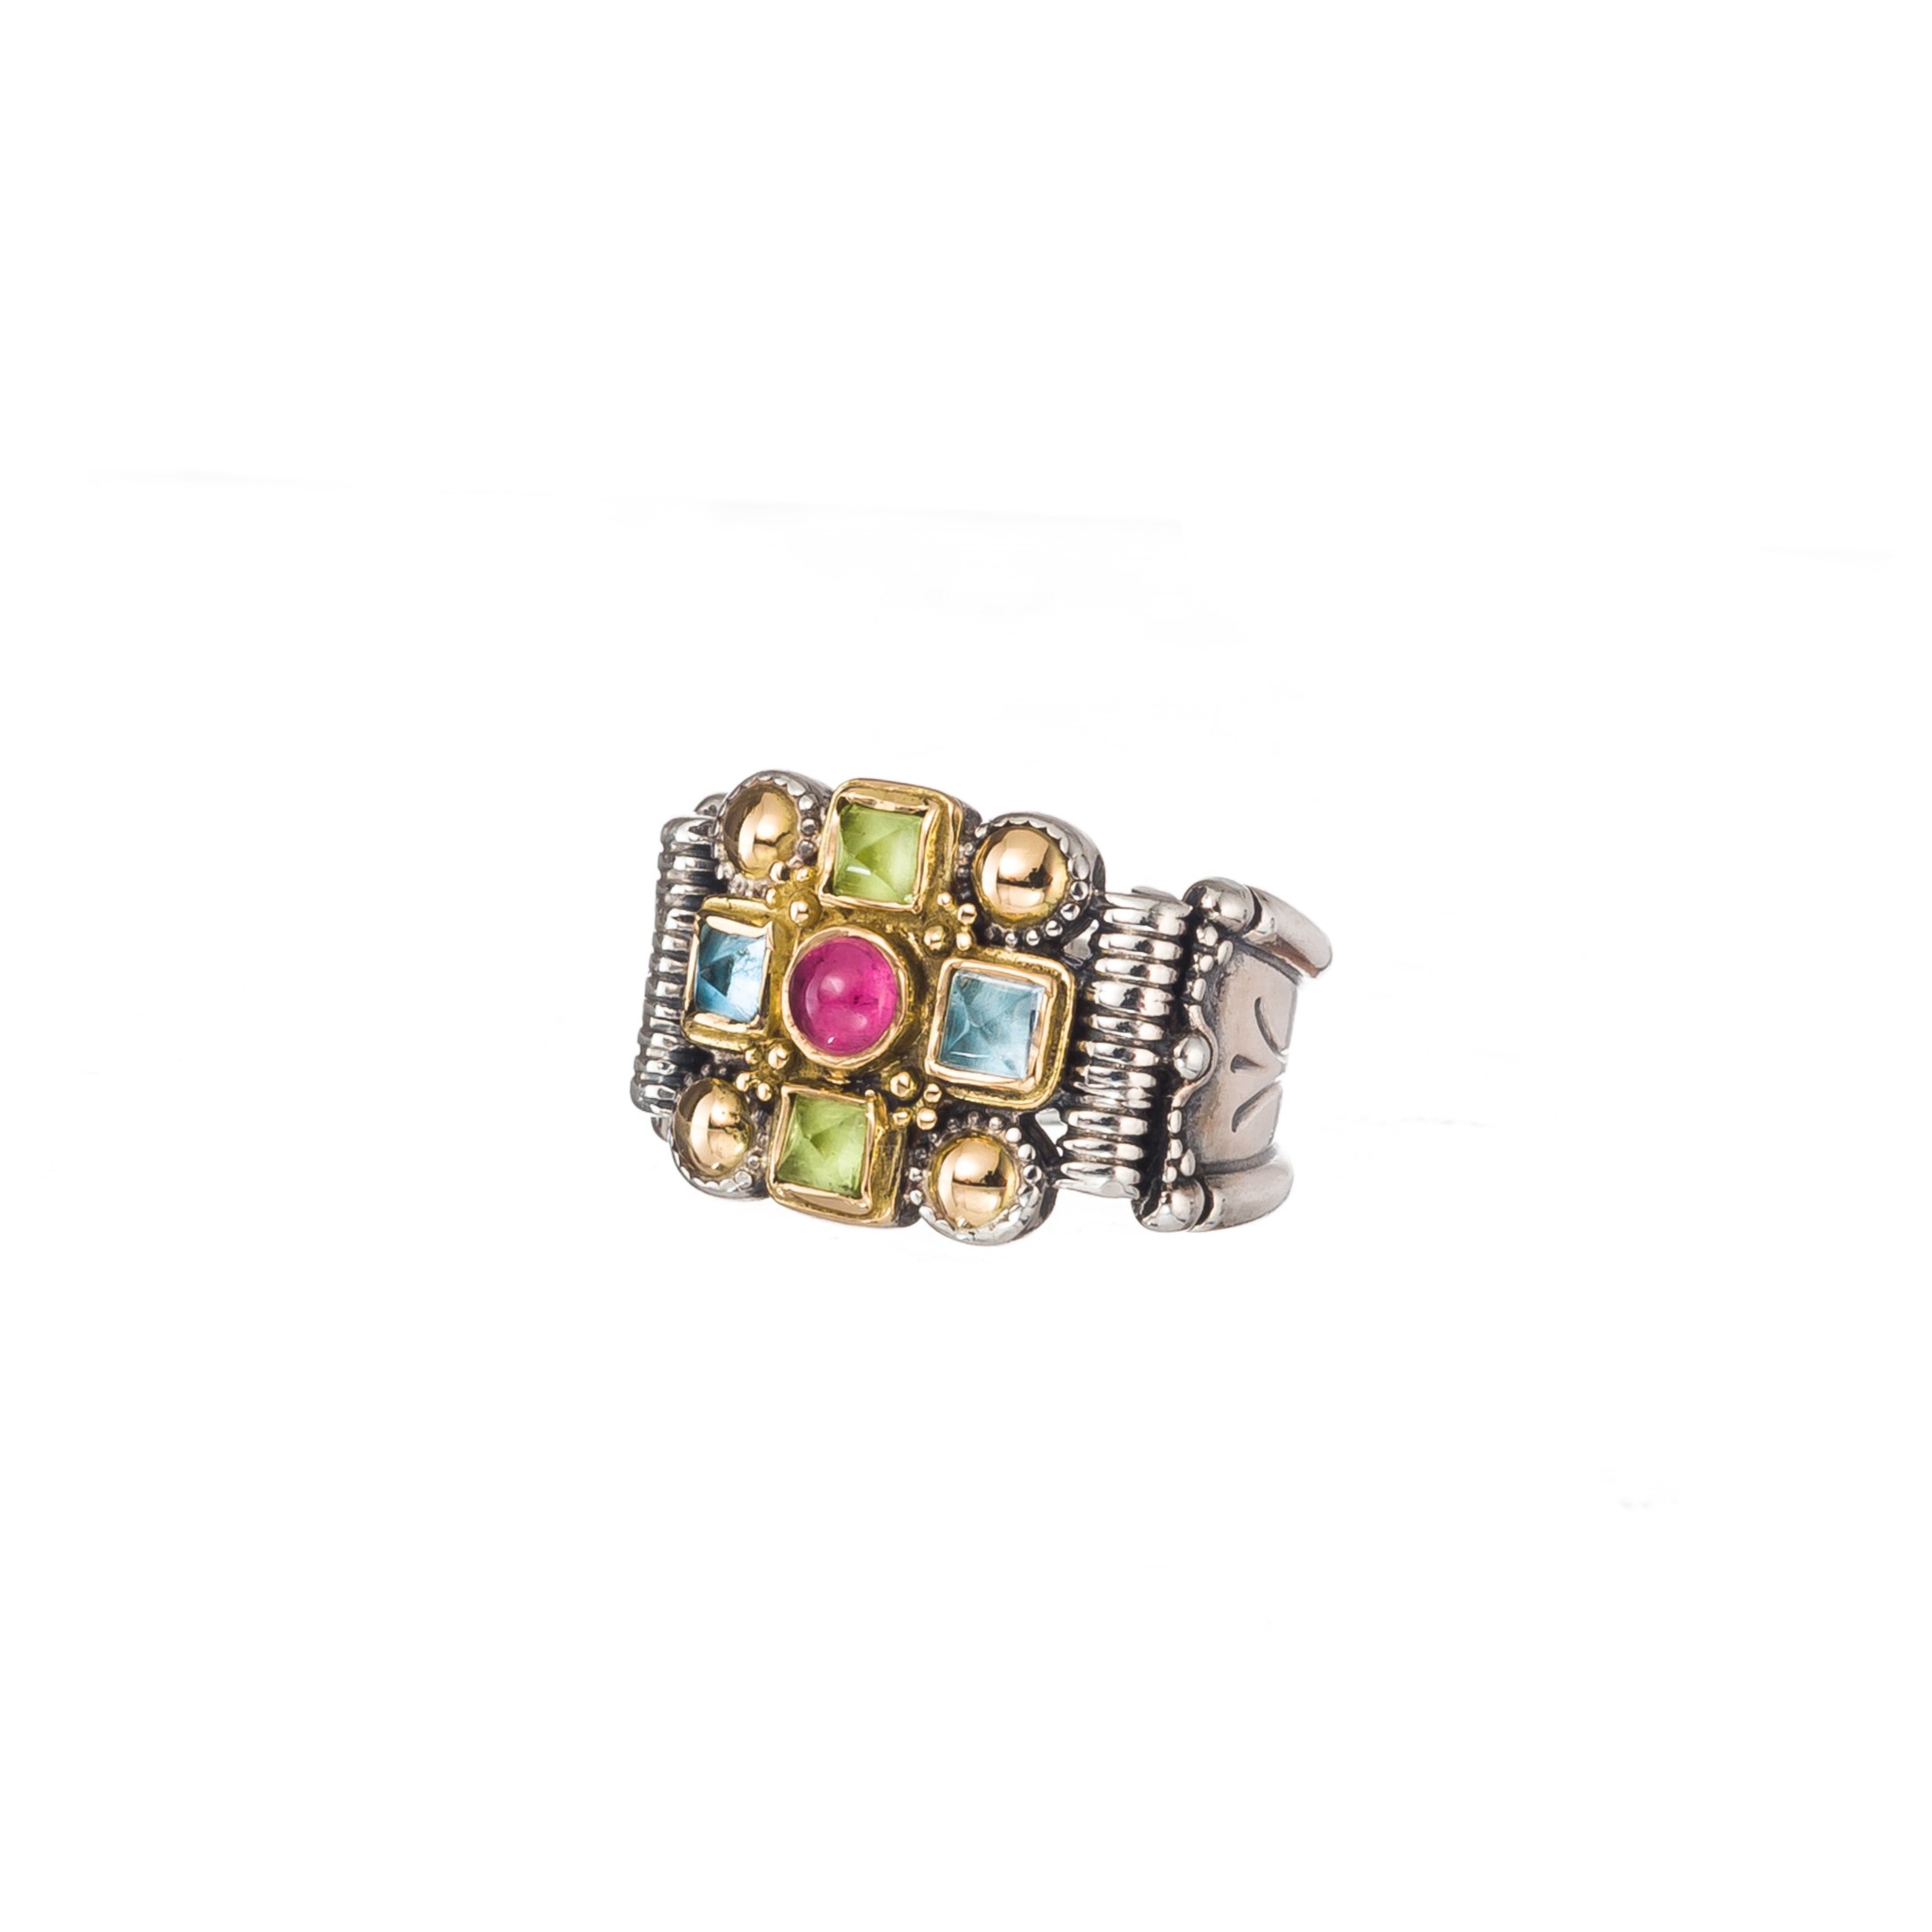 Byzantine cross ring in 18K Gold and Sterling Silver with multi semi precious stones